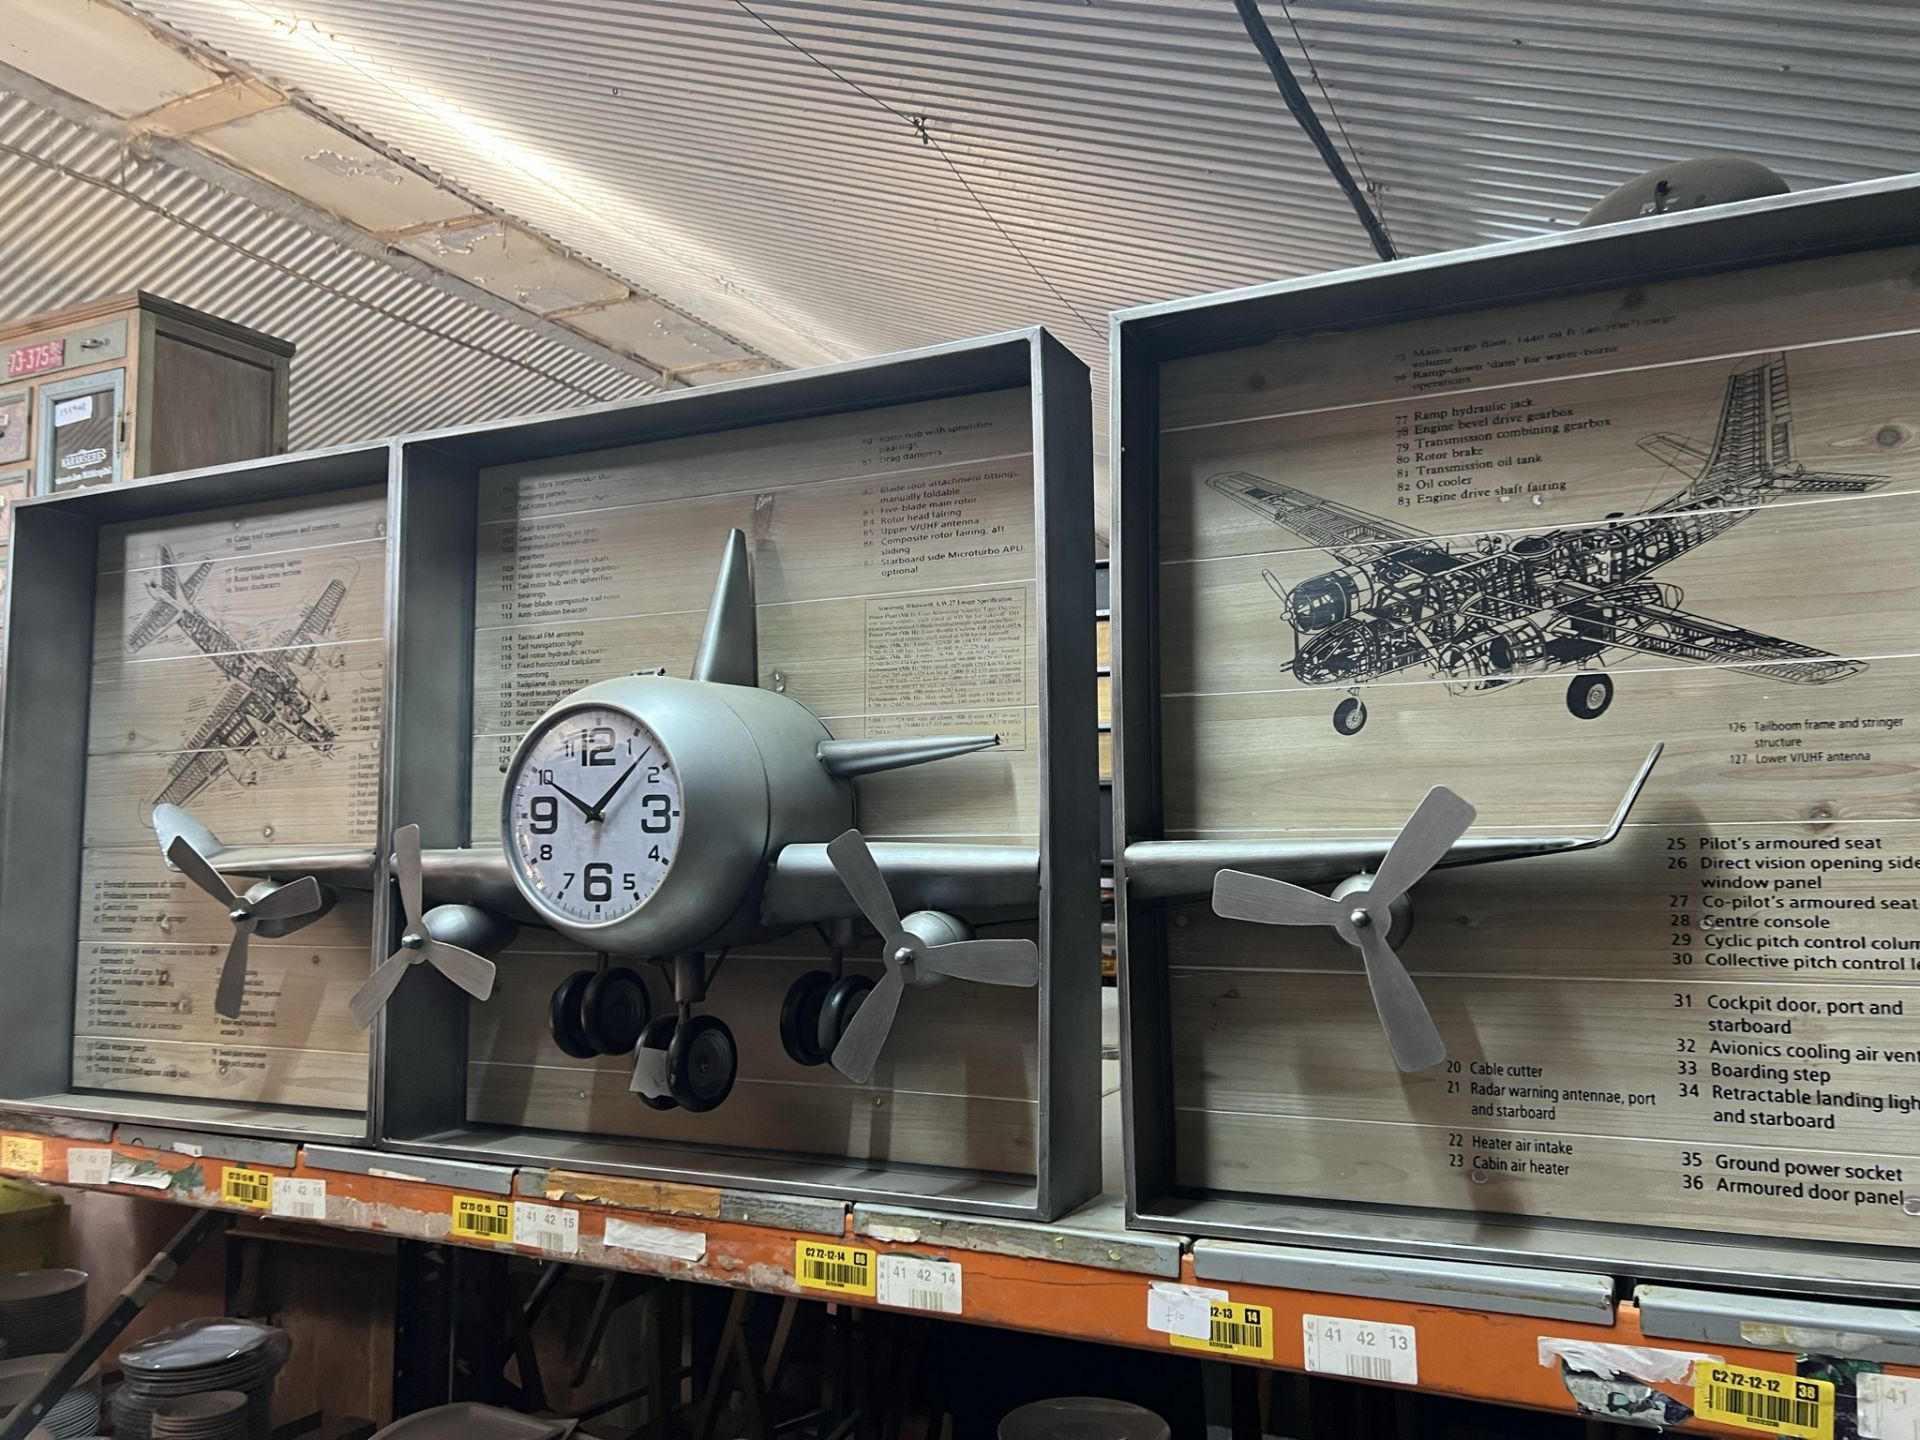 Wall Mounted Model in 3 section of a plane with a clock face